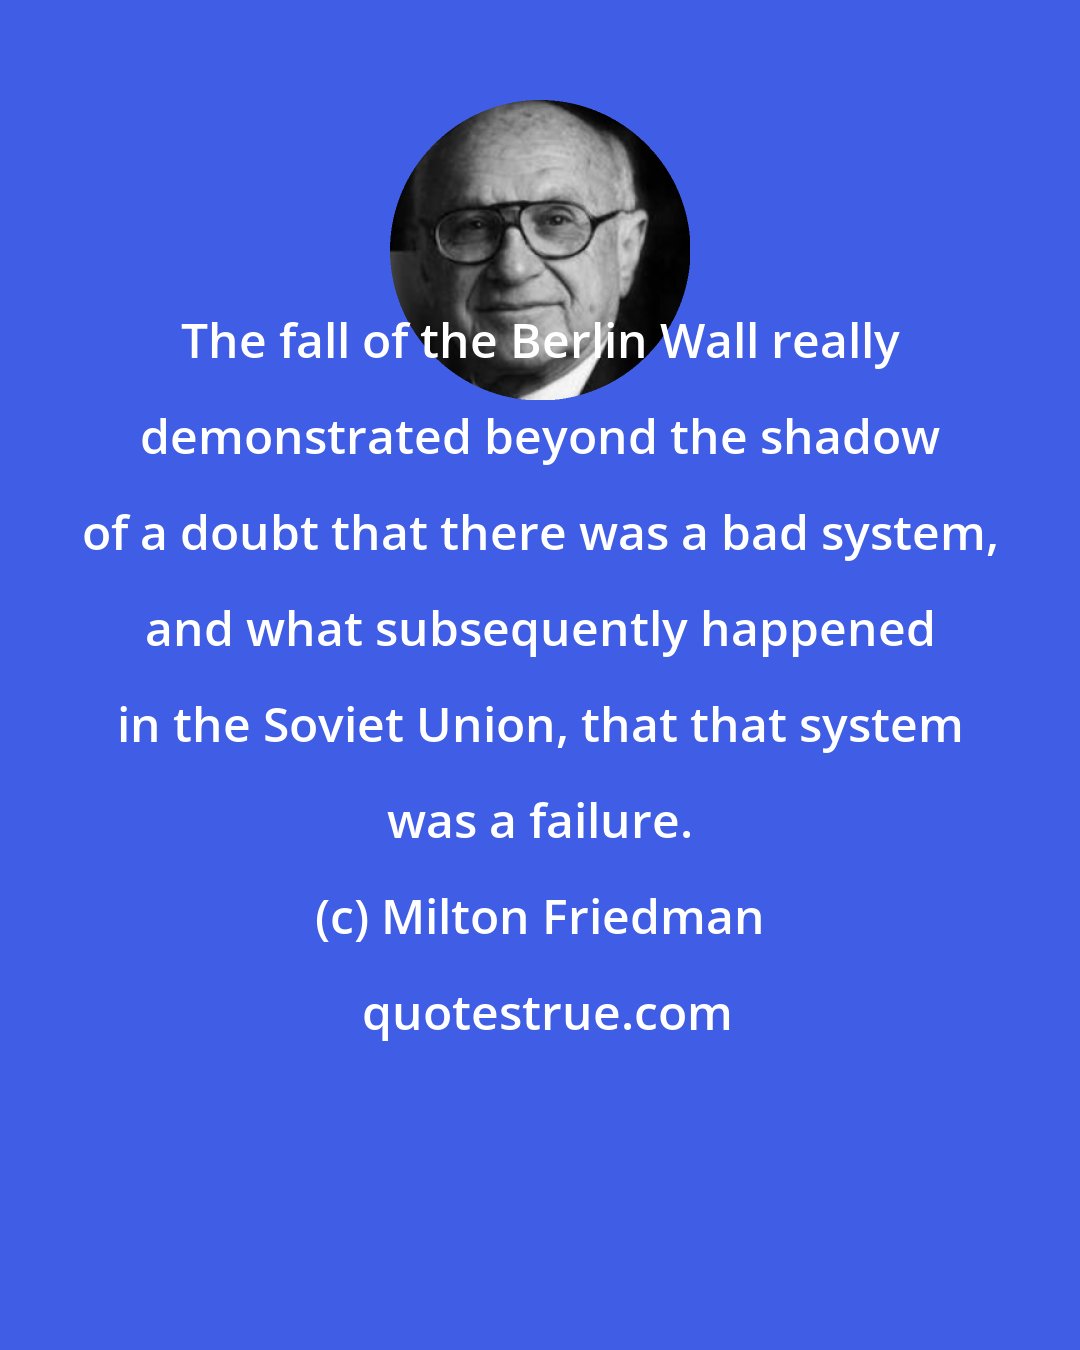 Milton Friedman: The fall of the Berlin Wall really demonstrated beyond the shadow of a doubt that there was a bad system, and what subsequently happened in the Soviet Union, that that system was a failure.